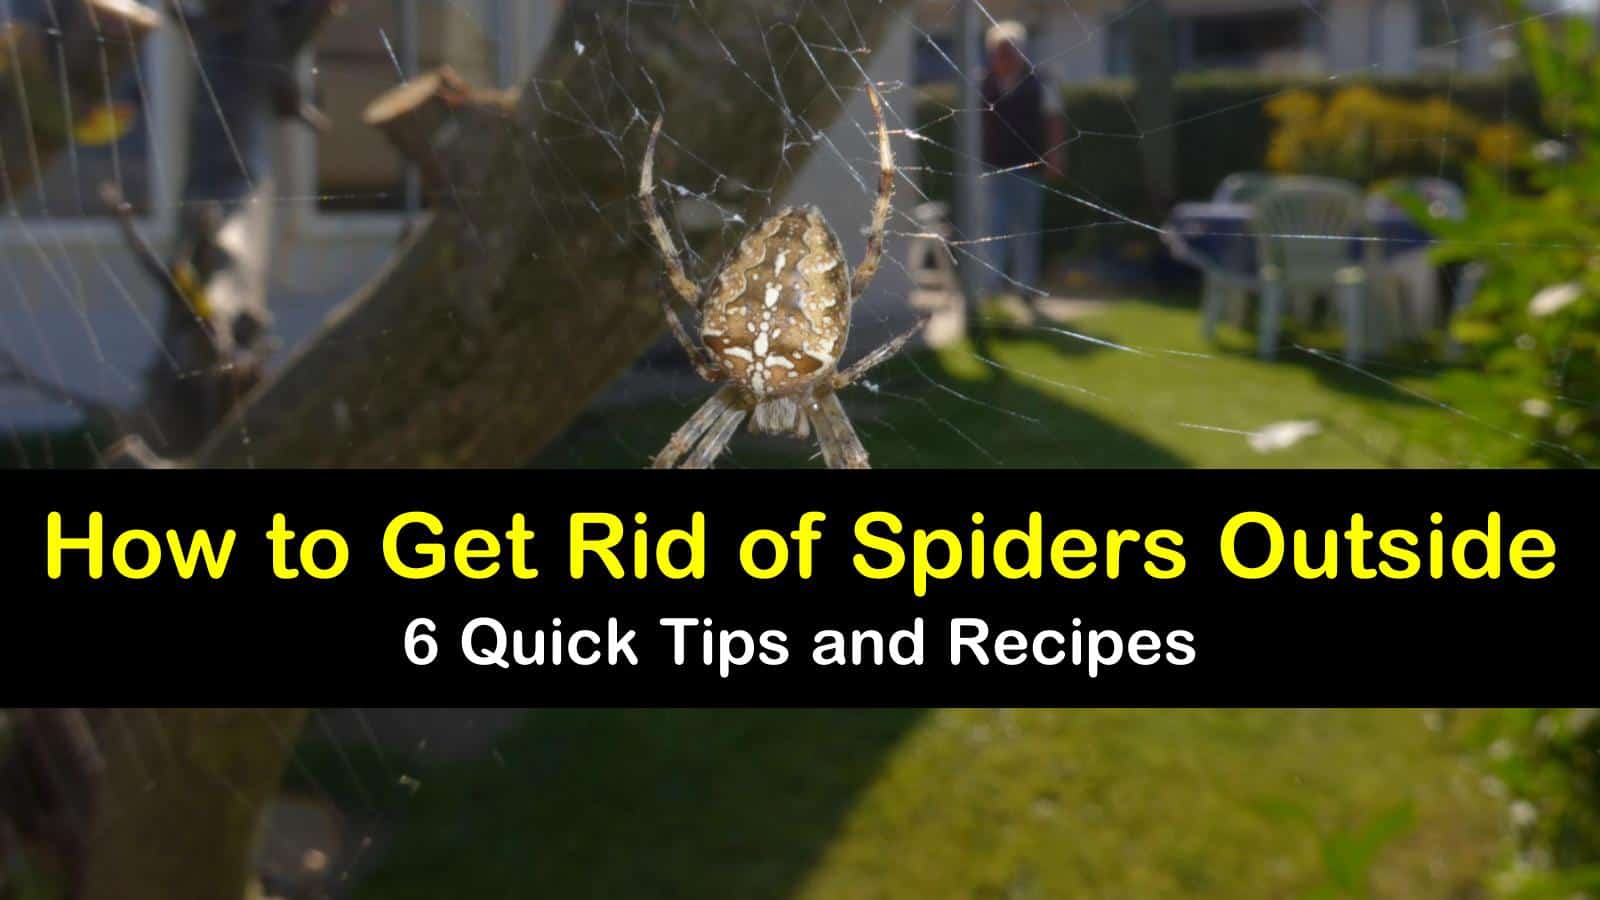 how to get rid of spiders outside titleimg1